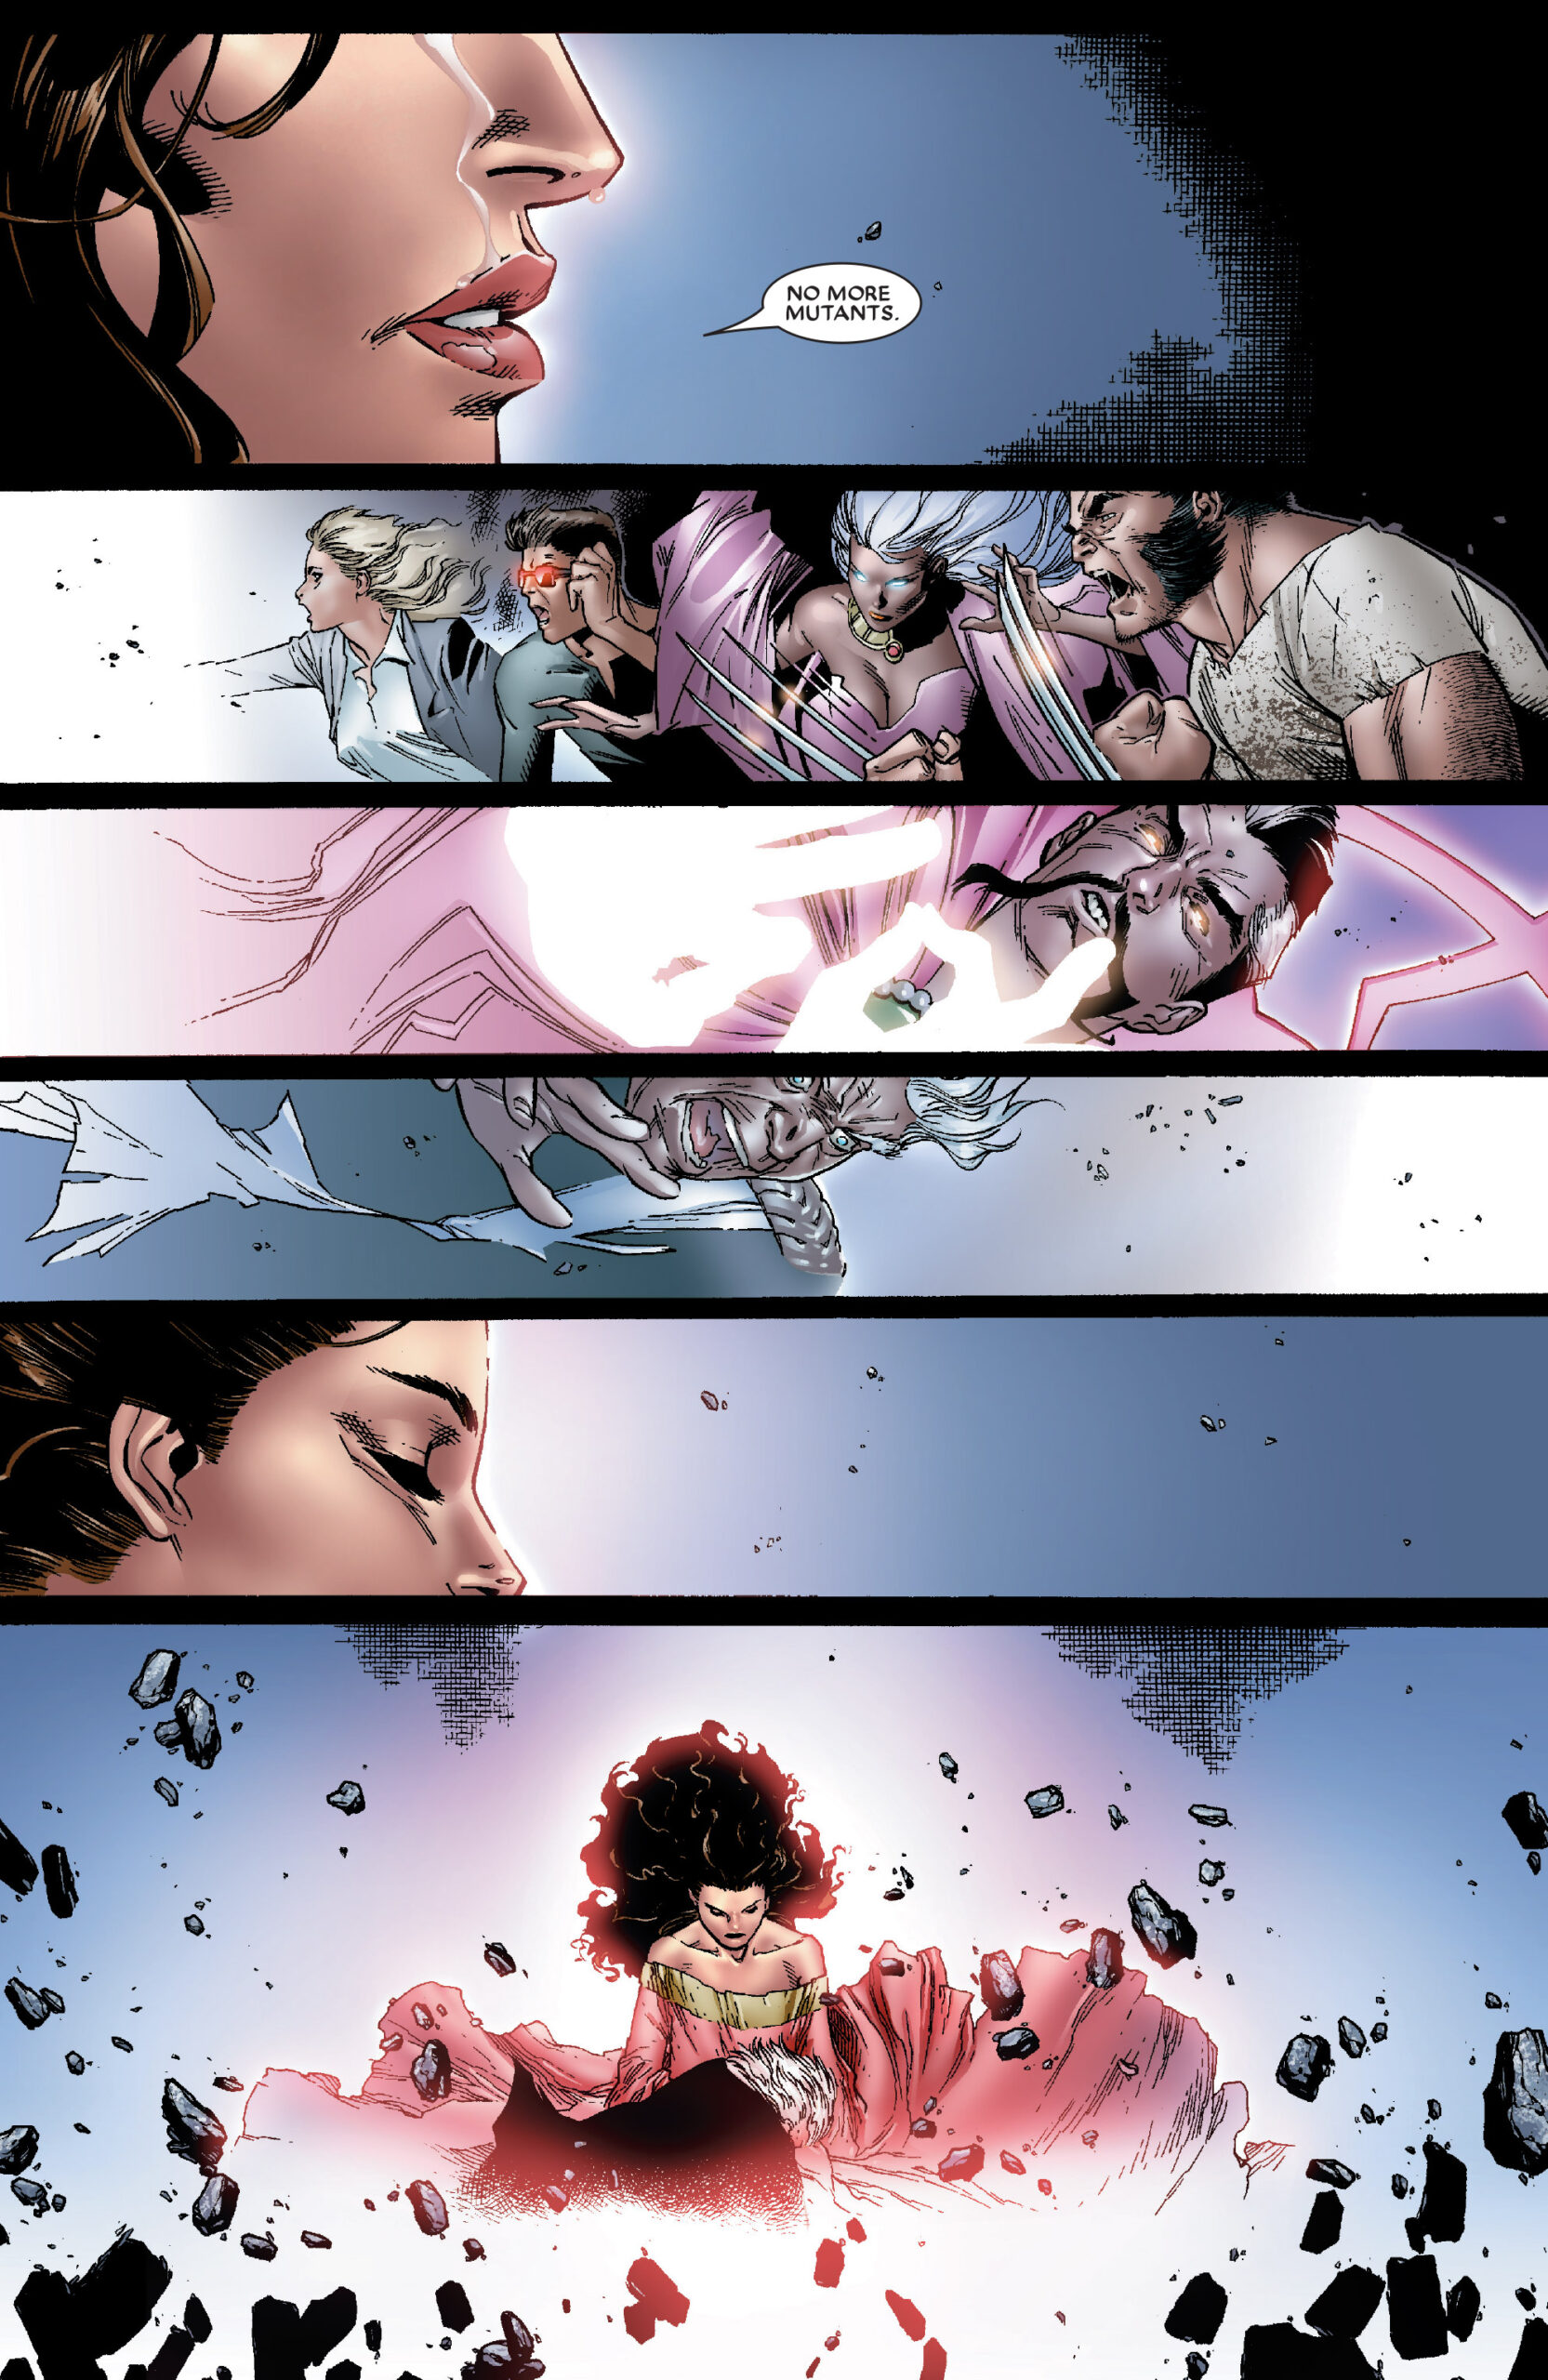 The Scarlet Witch puts an end to mutantkind in House of M Vol. 1 #1 (2005). Words by Brian Michael Bendis, art by Olivier Coipel, Tim Townsend, Frank D'Armata, and Chris Eliopoulos.